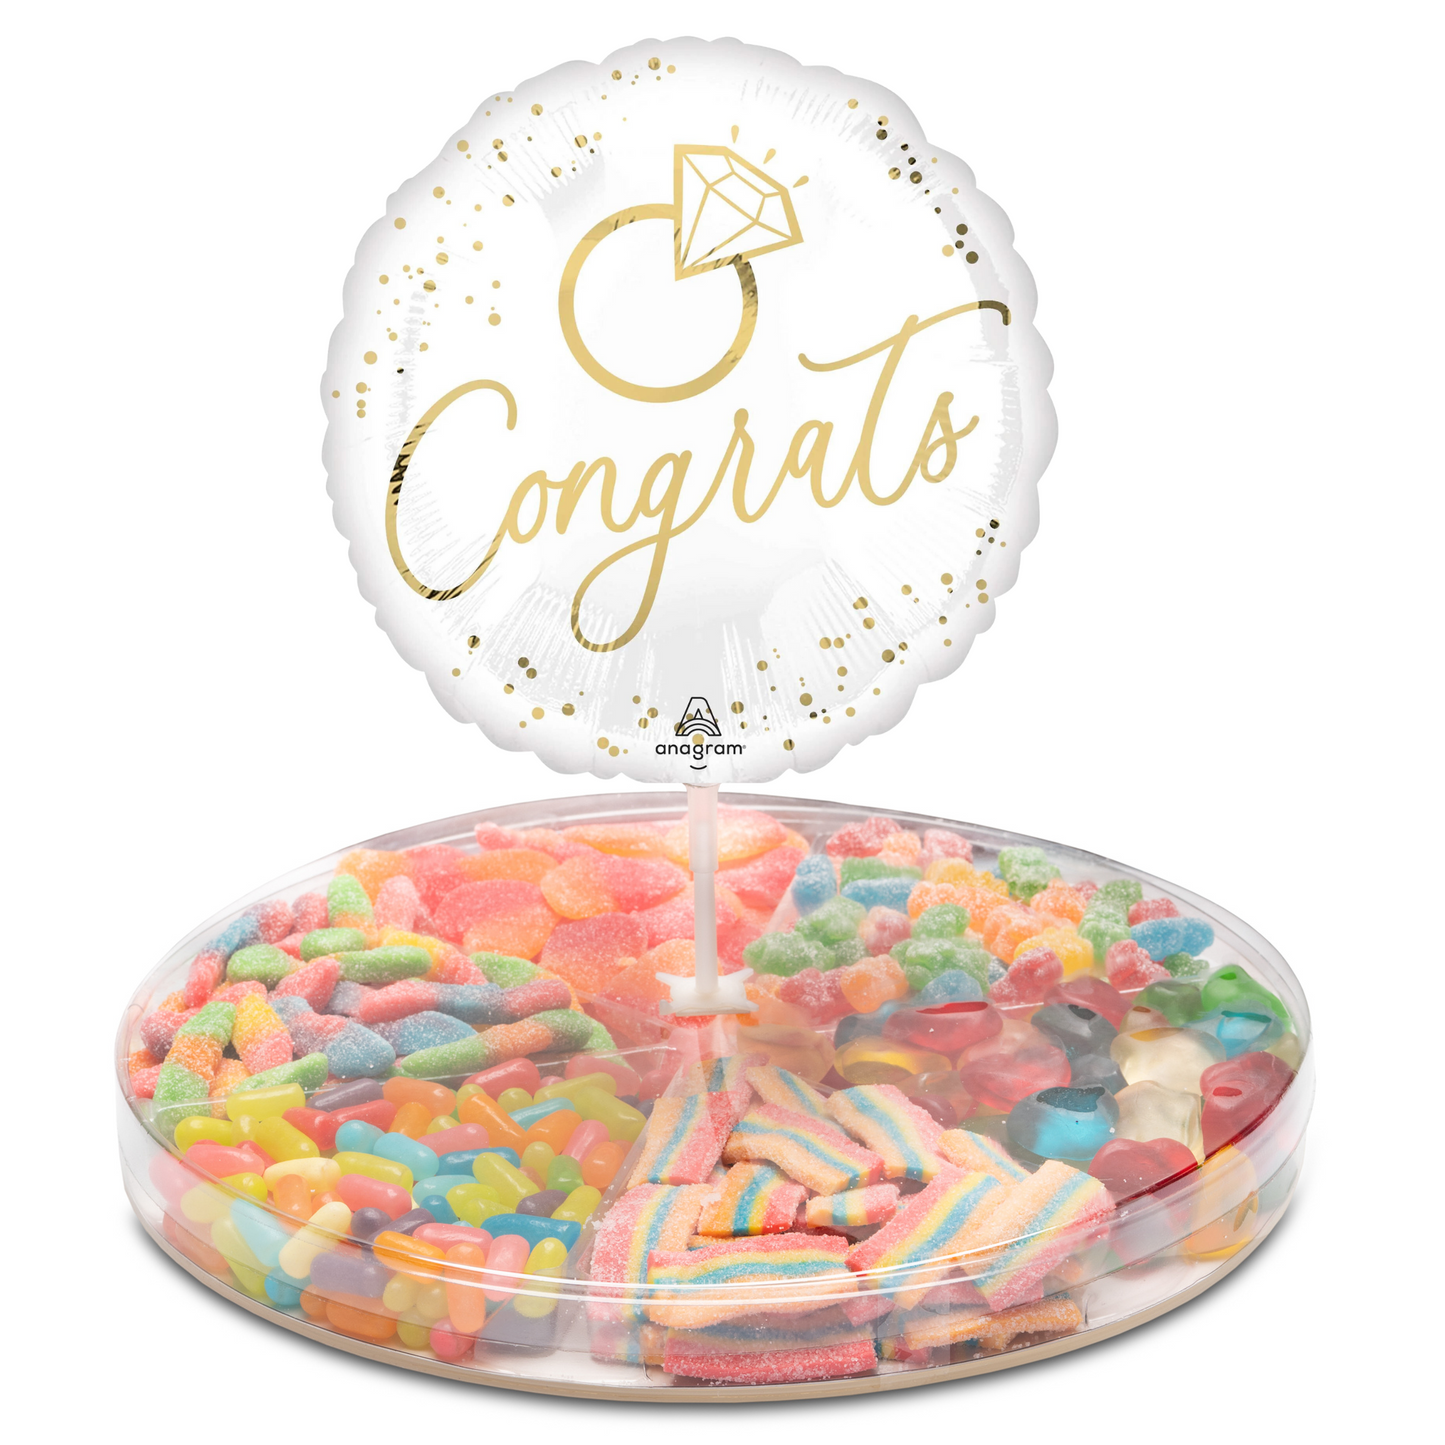 Large Platter with Congrats Balloon (Engagement)